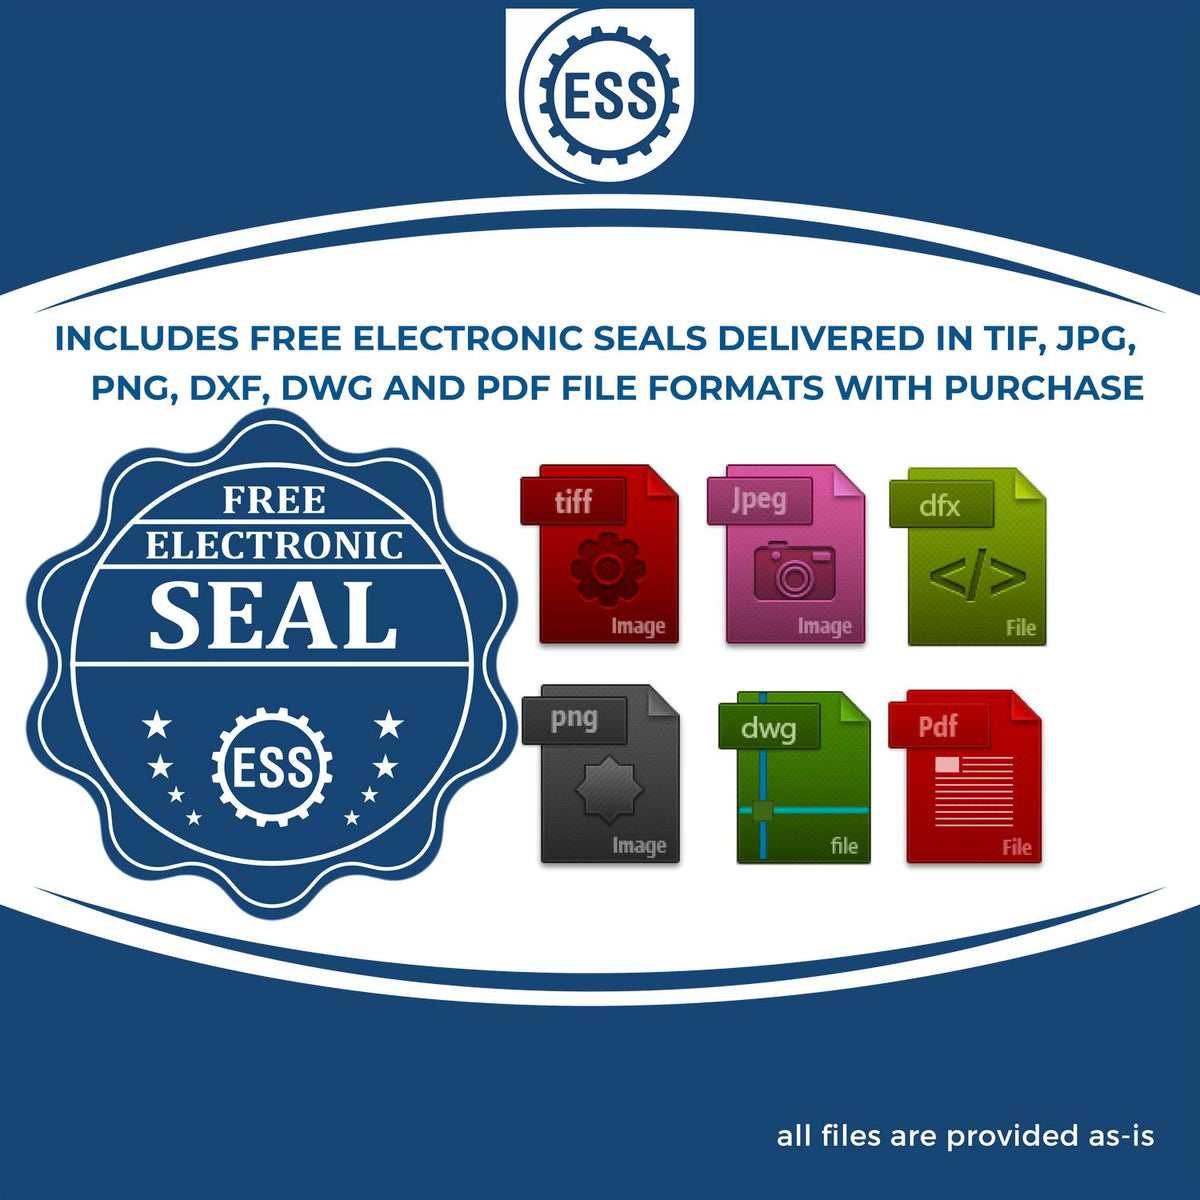 An infographic for the free electronic seal for the Hybrid Arkansas Geologist Seal illustrating the different file type icons such as DXF, DWG, TIF, JPG and PNG.